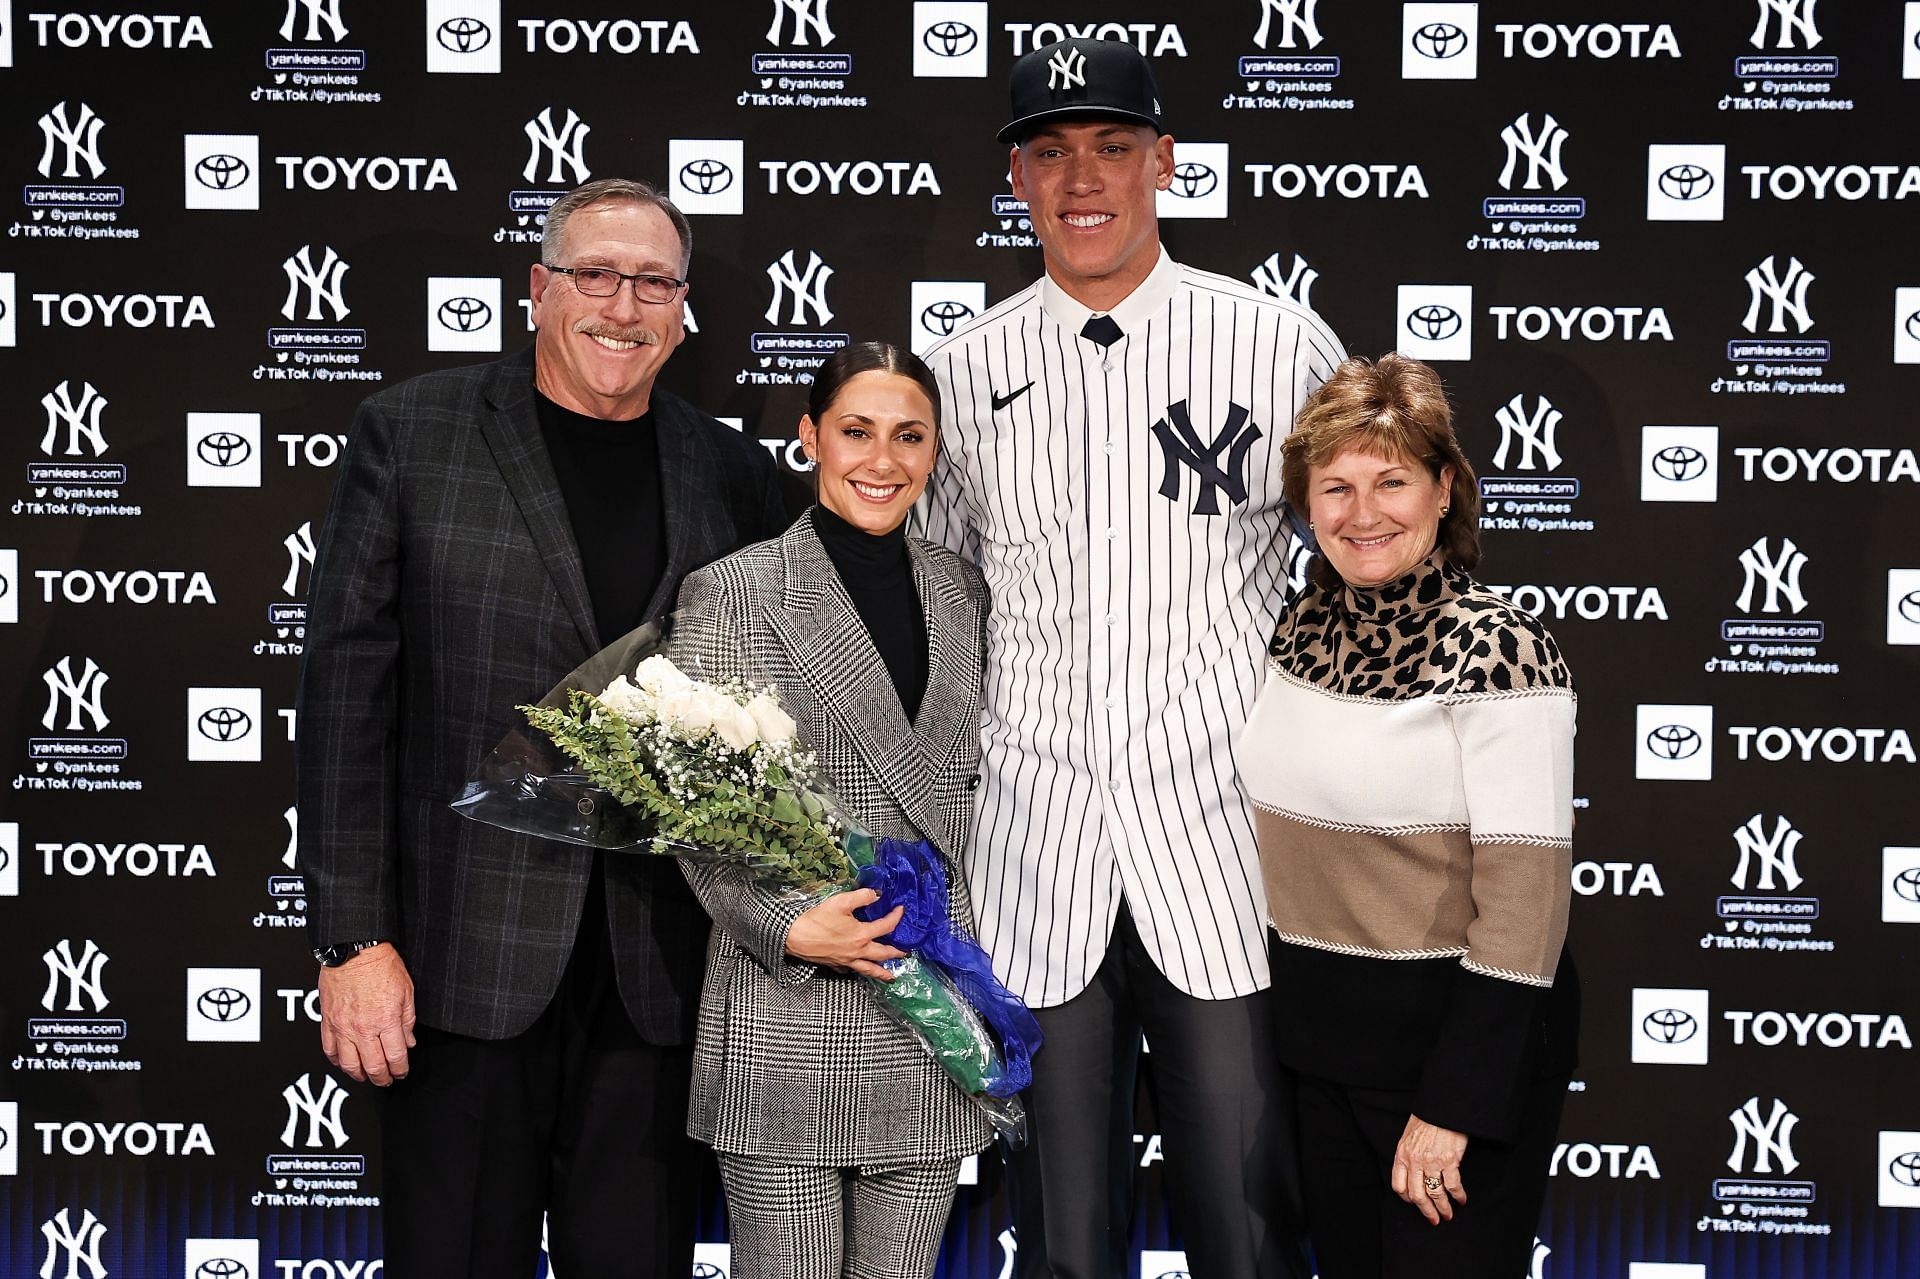 Aaron Judge Press Conference BRONX, NEW YORK - DECEMBER 21: Aaron Judge #99 of the New York Yankees poses for a photo with his wife Samantha Judge, and Parents, Patty Judge and Wayne Judge, after a press conference at Yankee Stadium on December 21, 2022, in Bronx, New York. (Photo by Dustin Satloff/Getty Images)